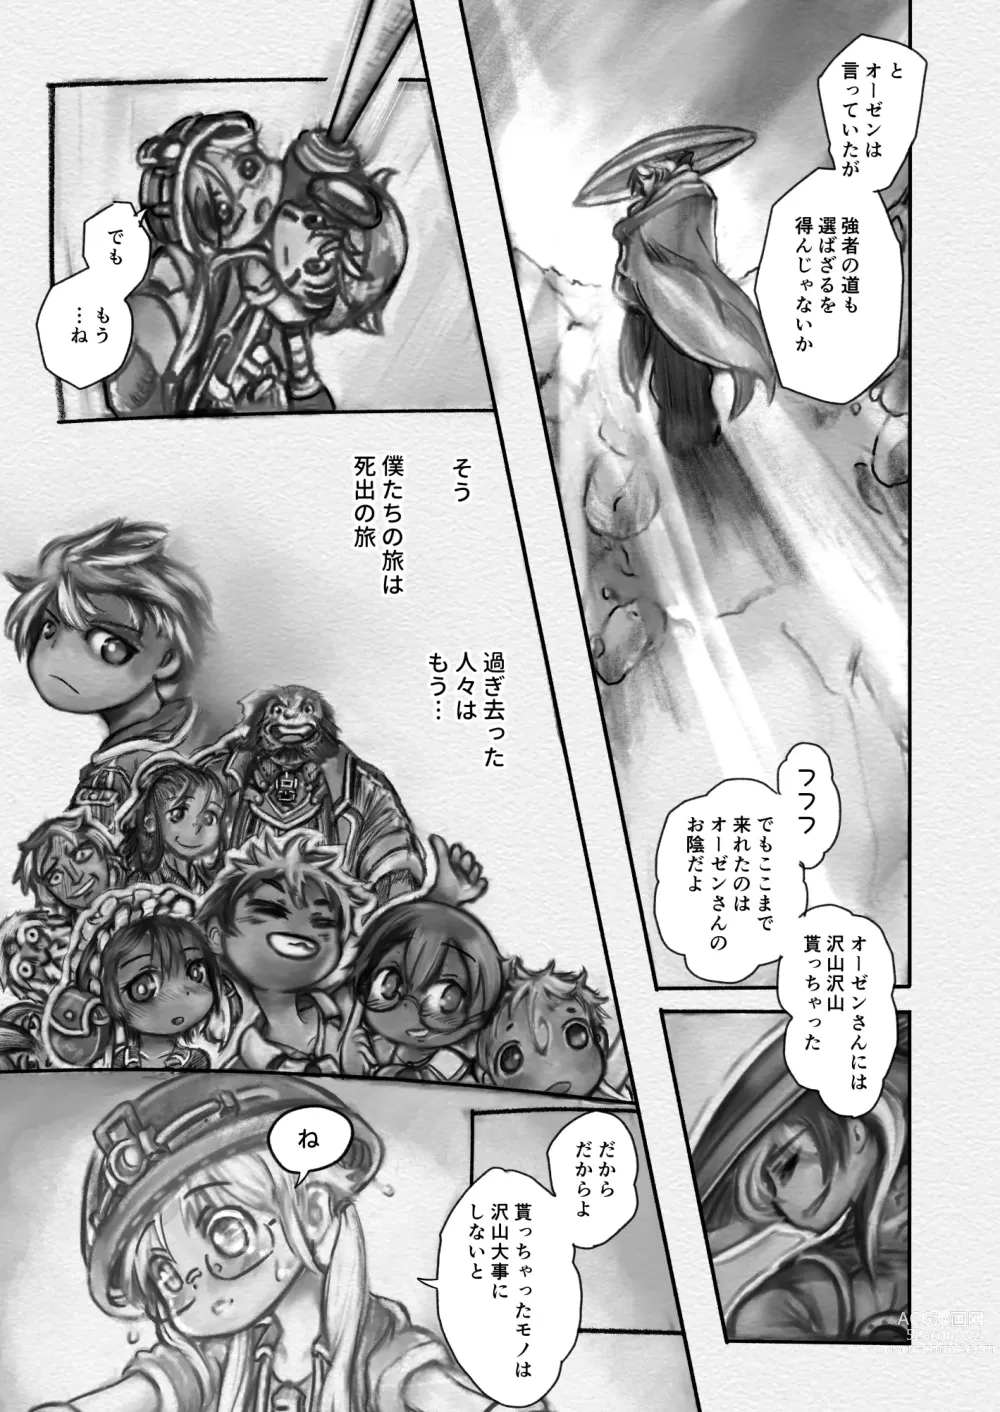 Page 7 of doujinshi Abyss Diver